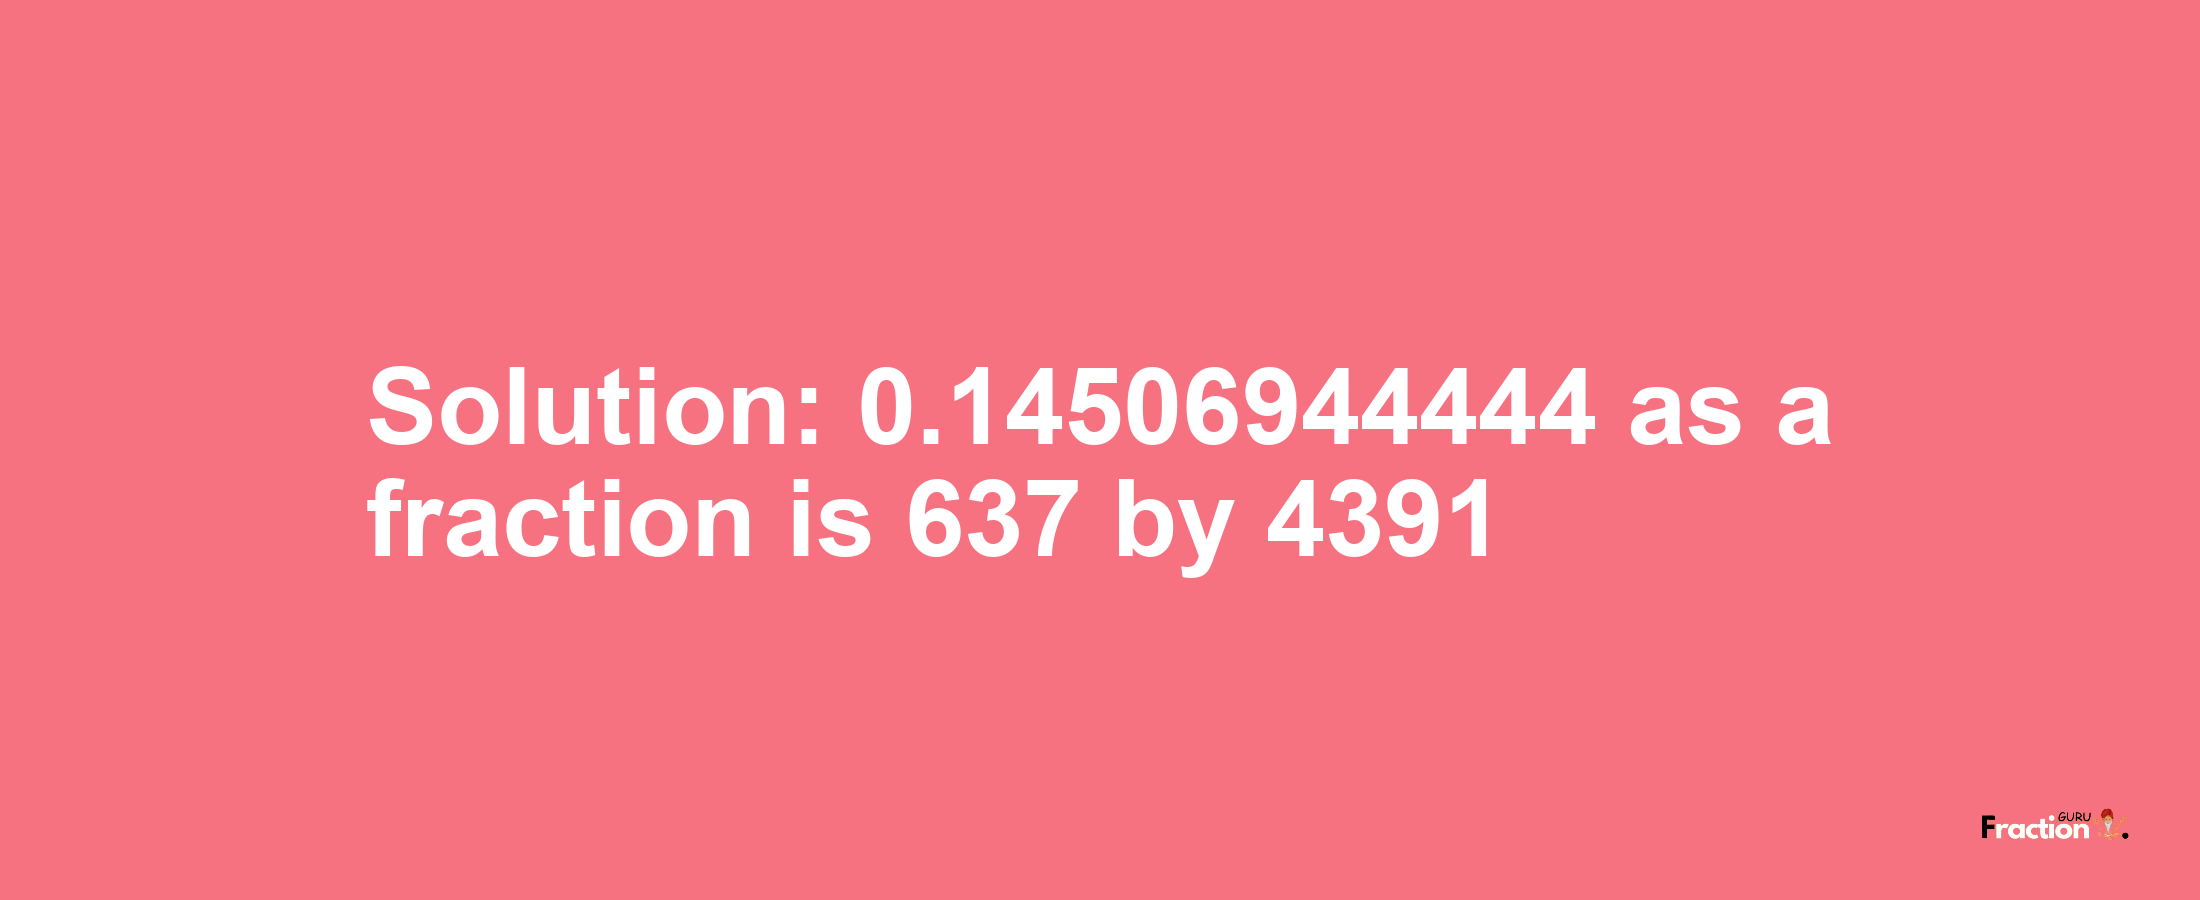 Solution:0.14506944444 as a fraction is 637/4391